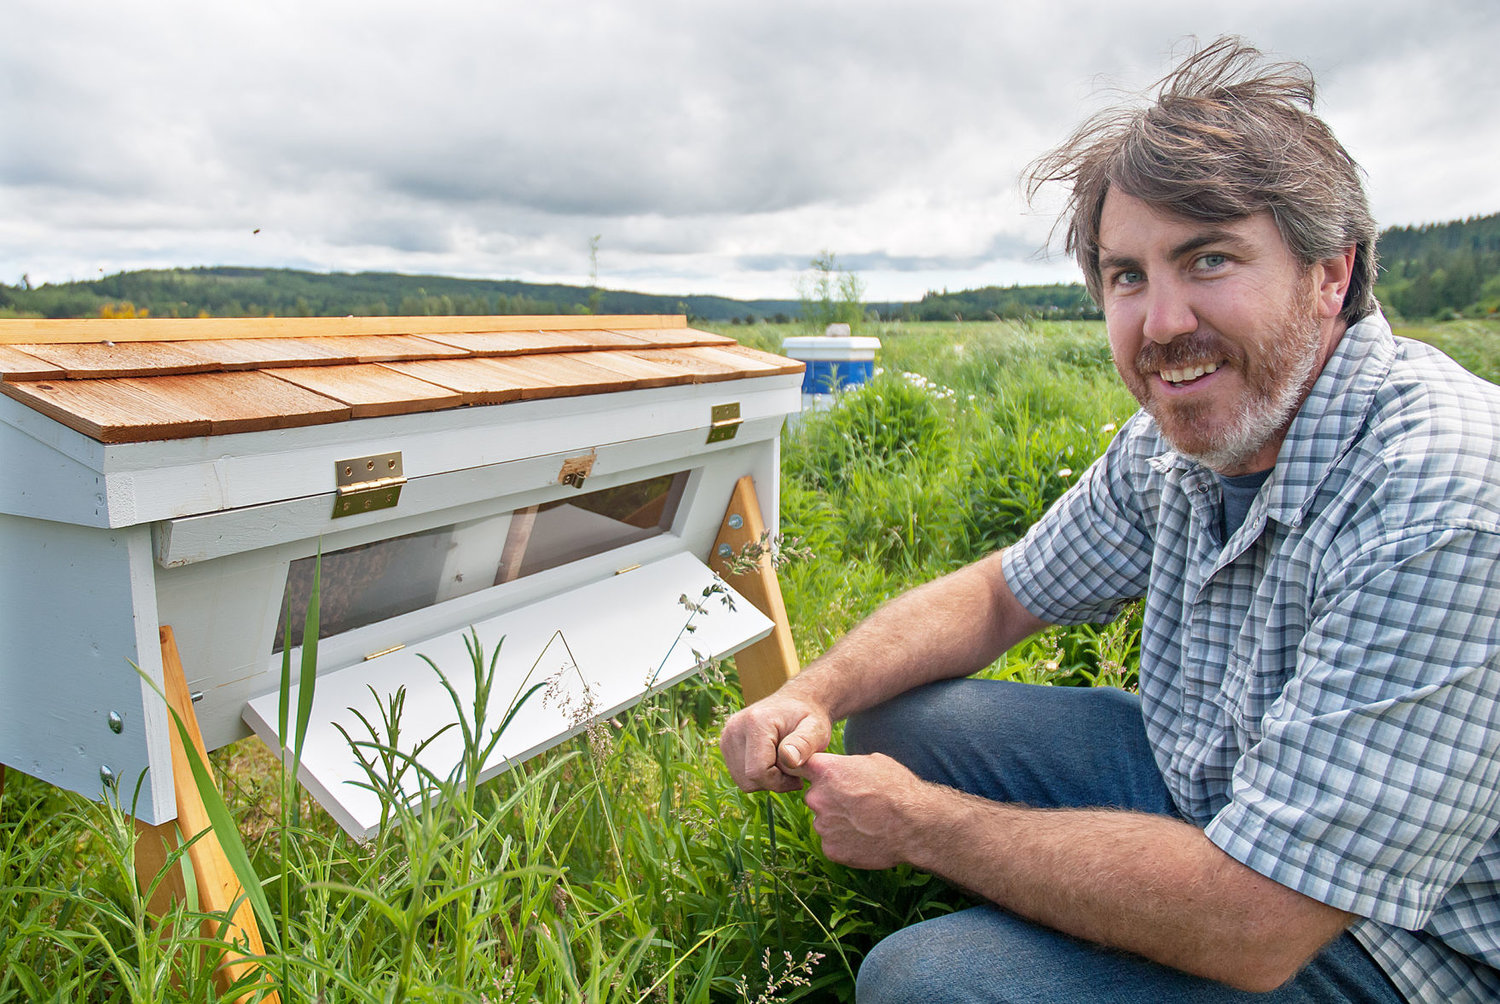 Chimacum High School teacher Gary Coyan, recently named as a Washington State Teacher of the Year, kneels next to the school’s top-bar beehive. Photo by Chris Tucker